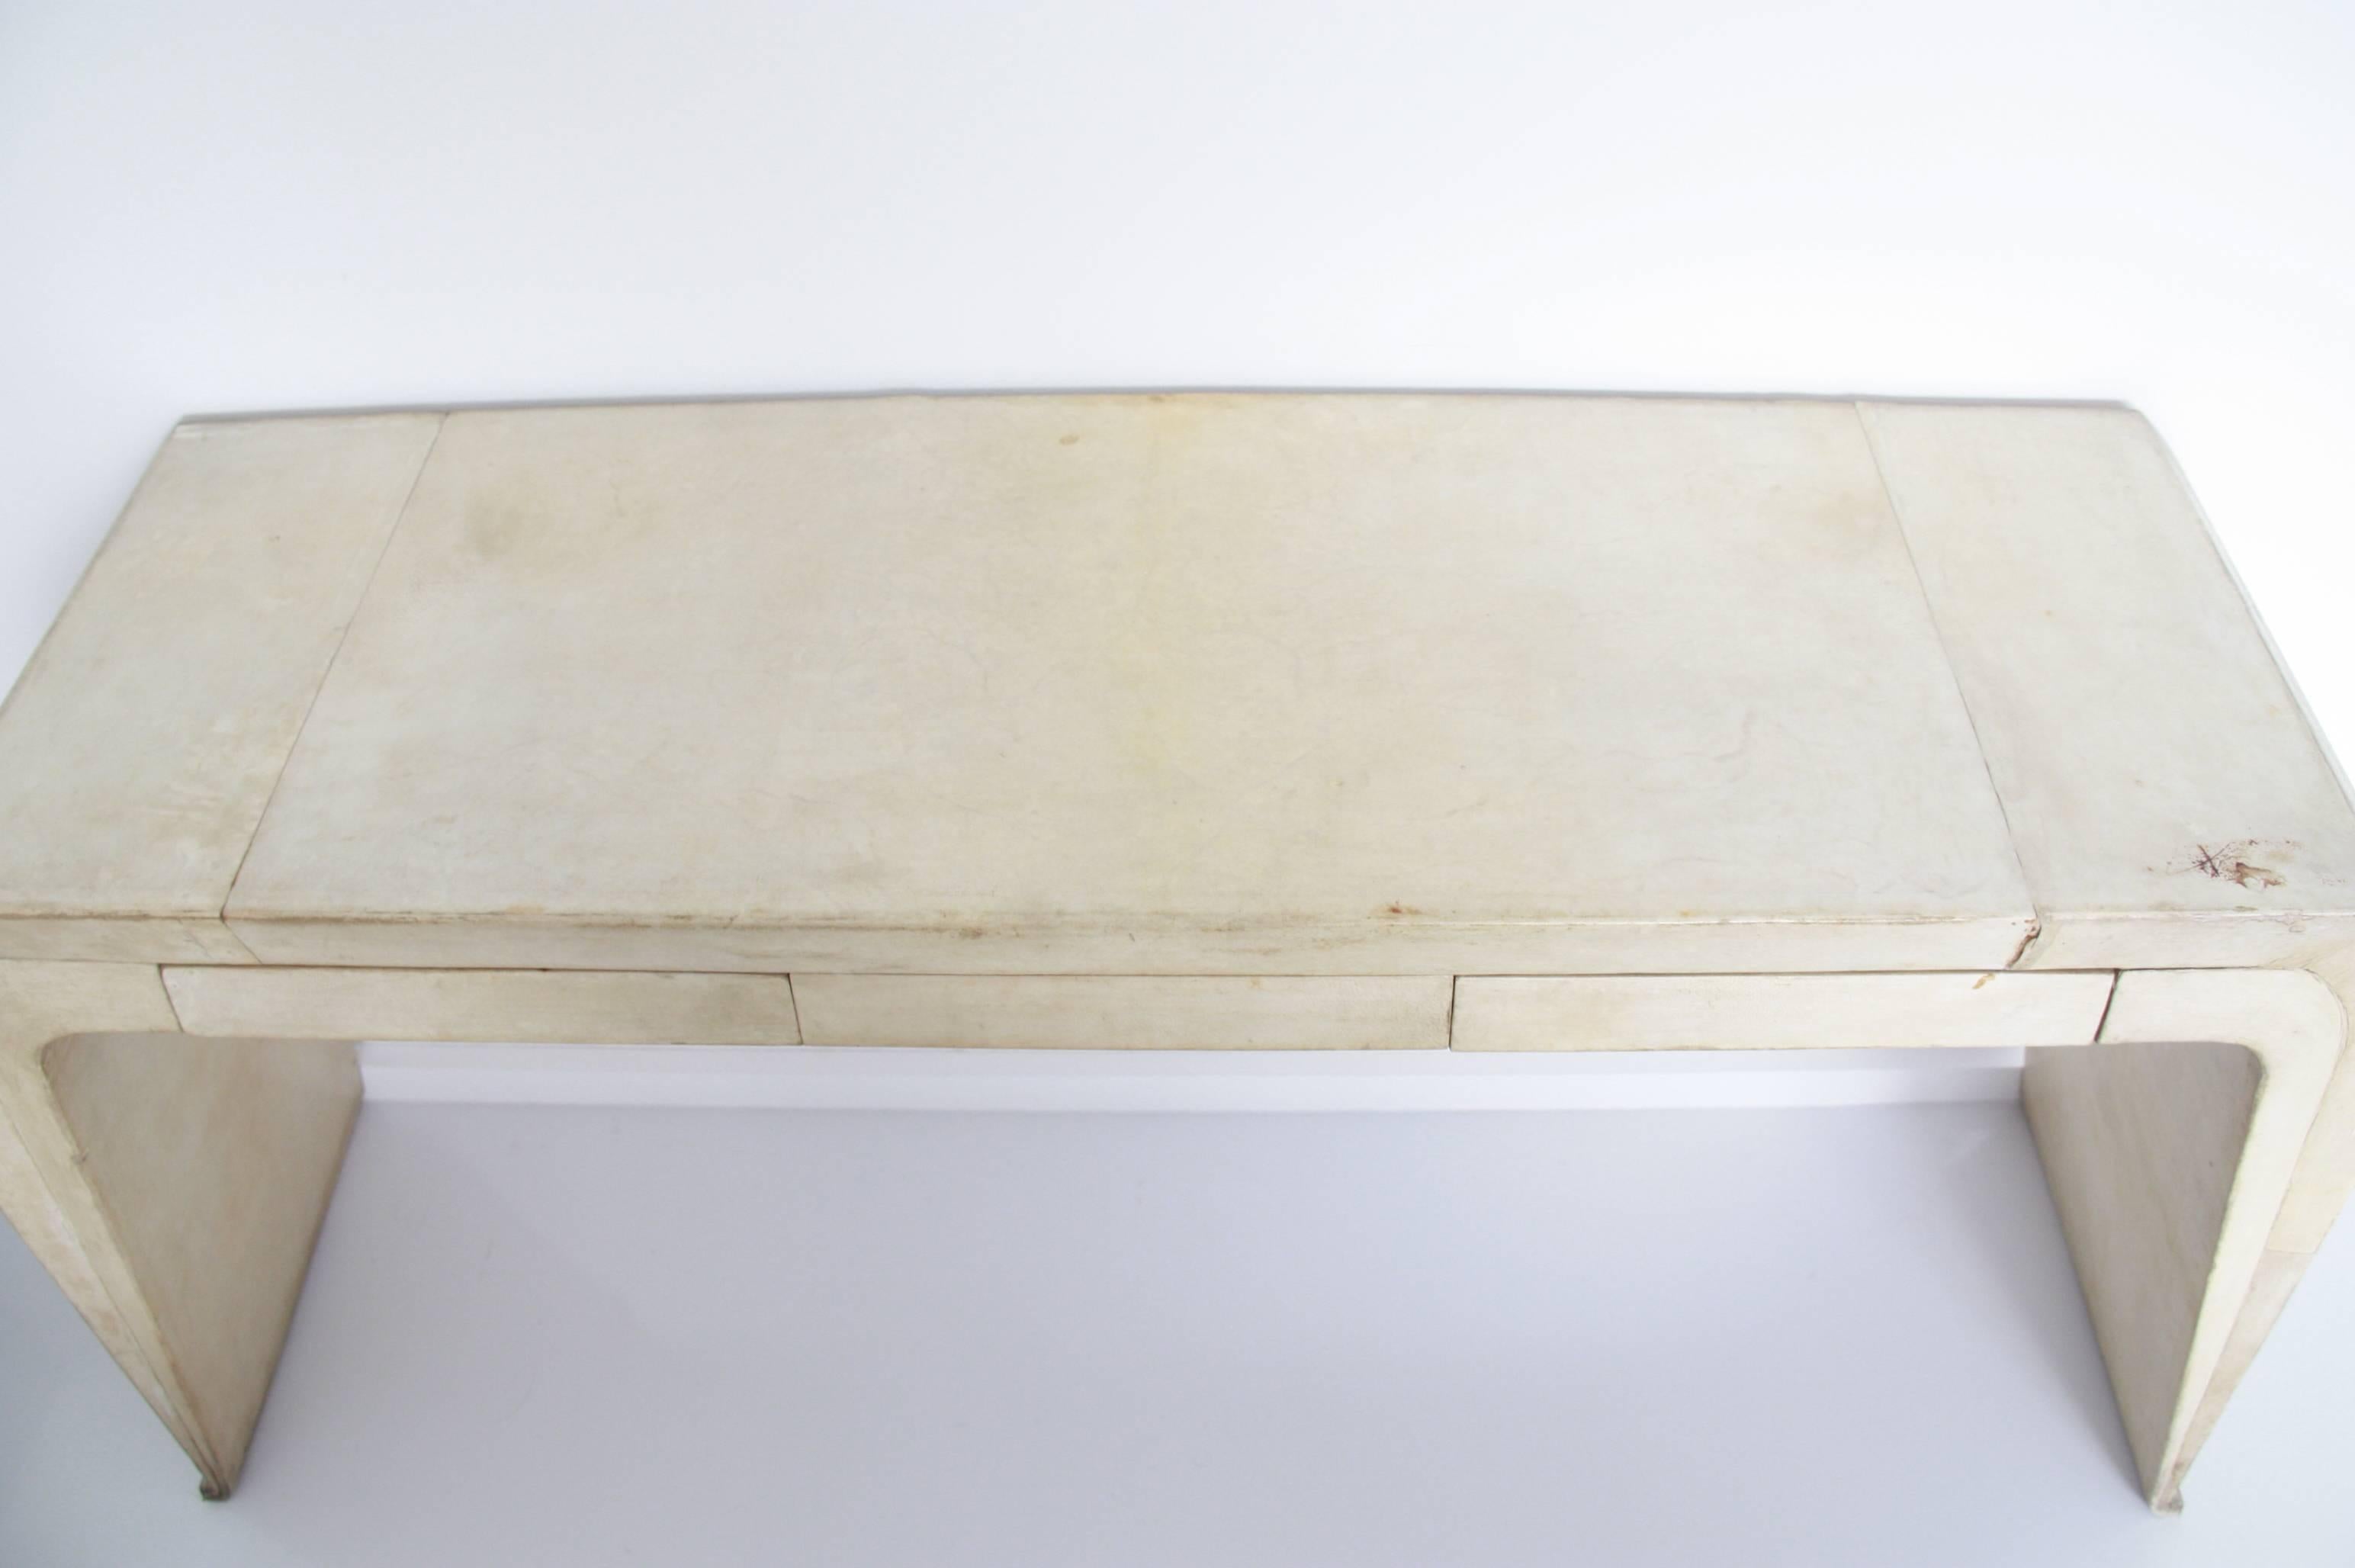 Parchment Paper Italian Vintage Vellum Console with Drawers by Valzania, circa 1940 For Sale